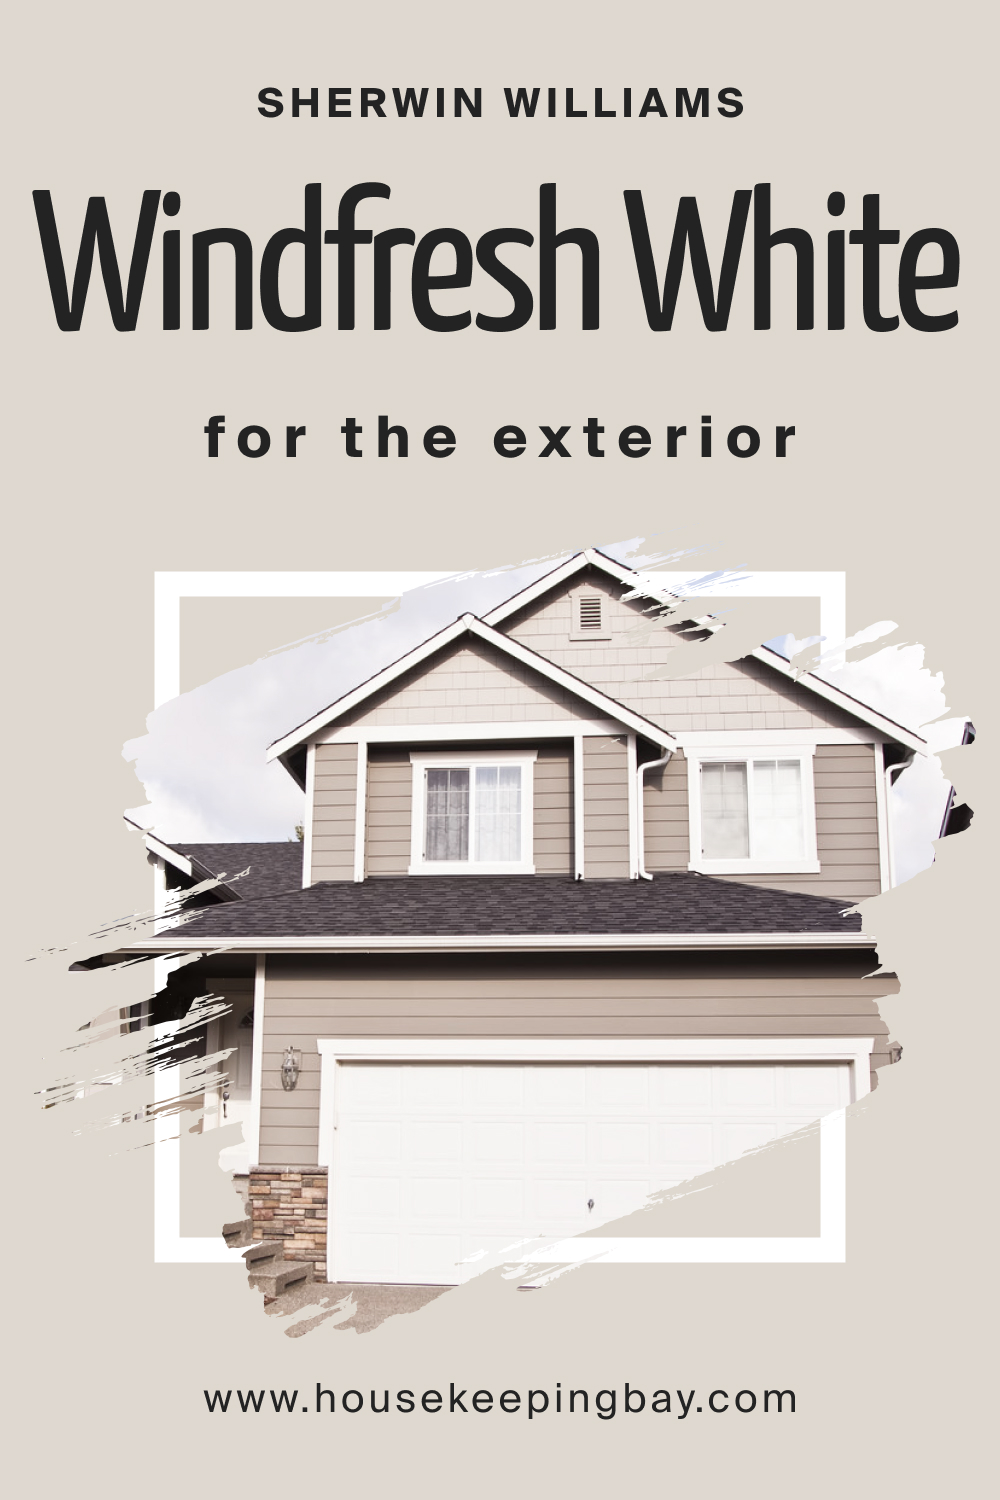 Sherwin Williams. SW Windfresh White For the exterior